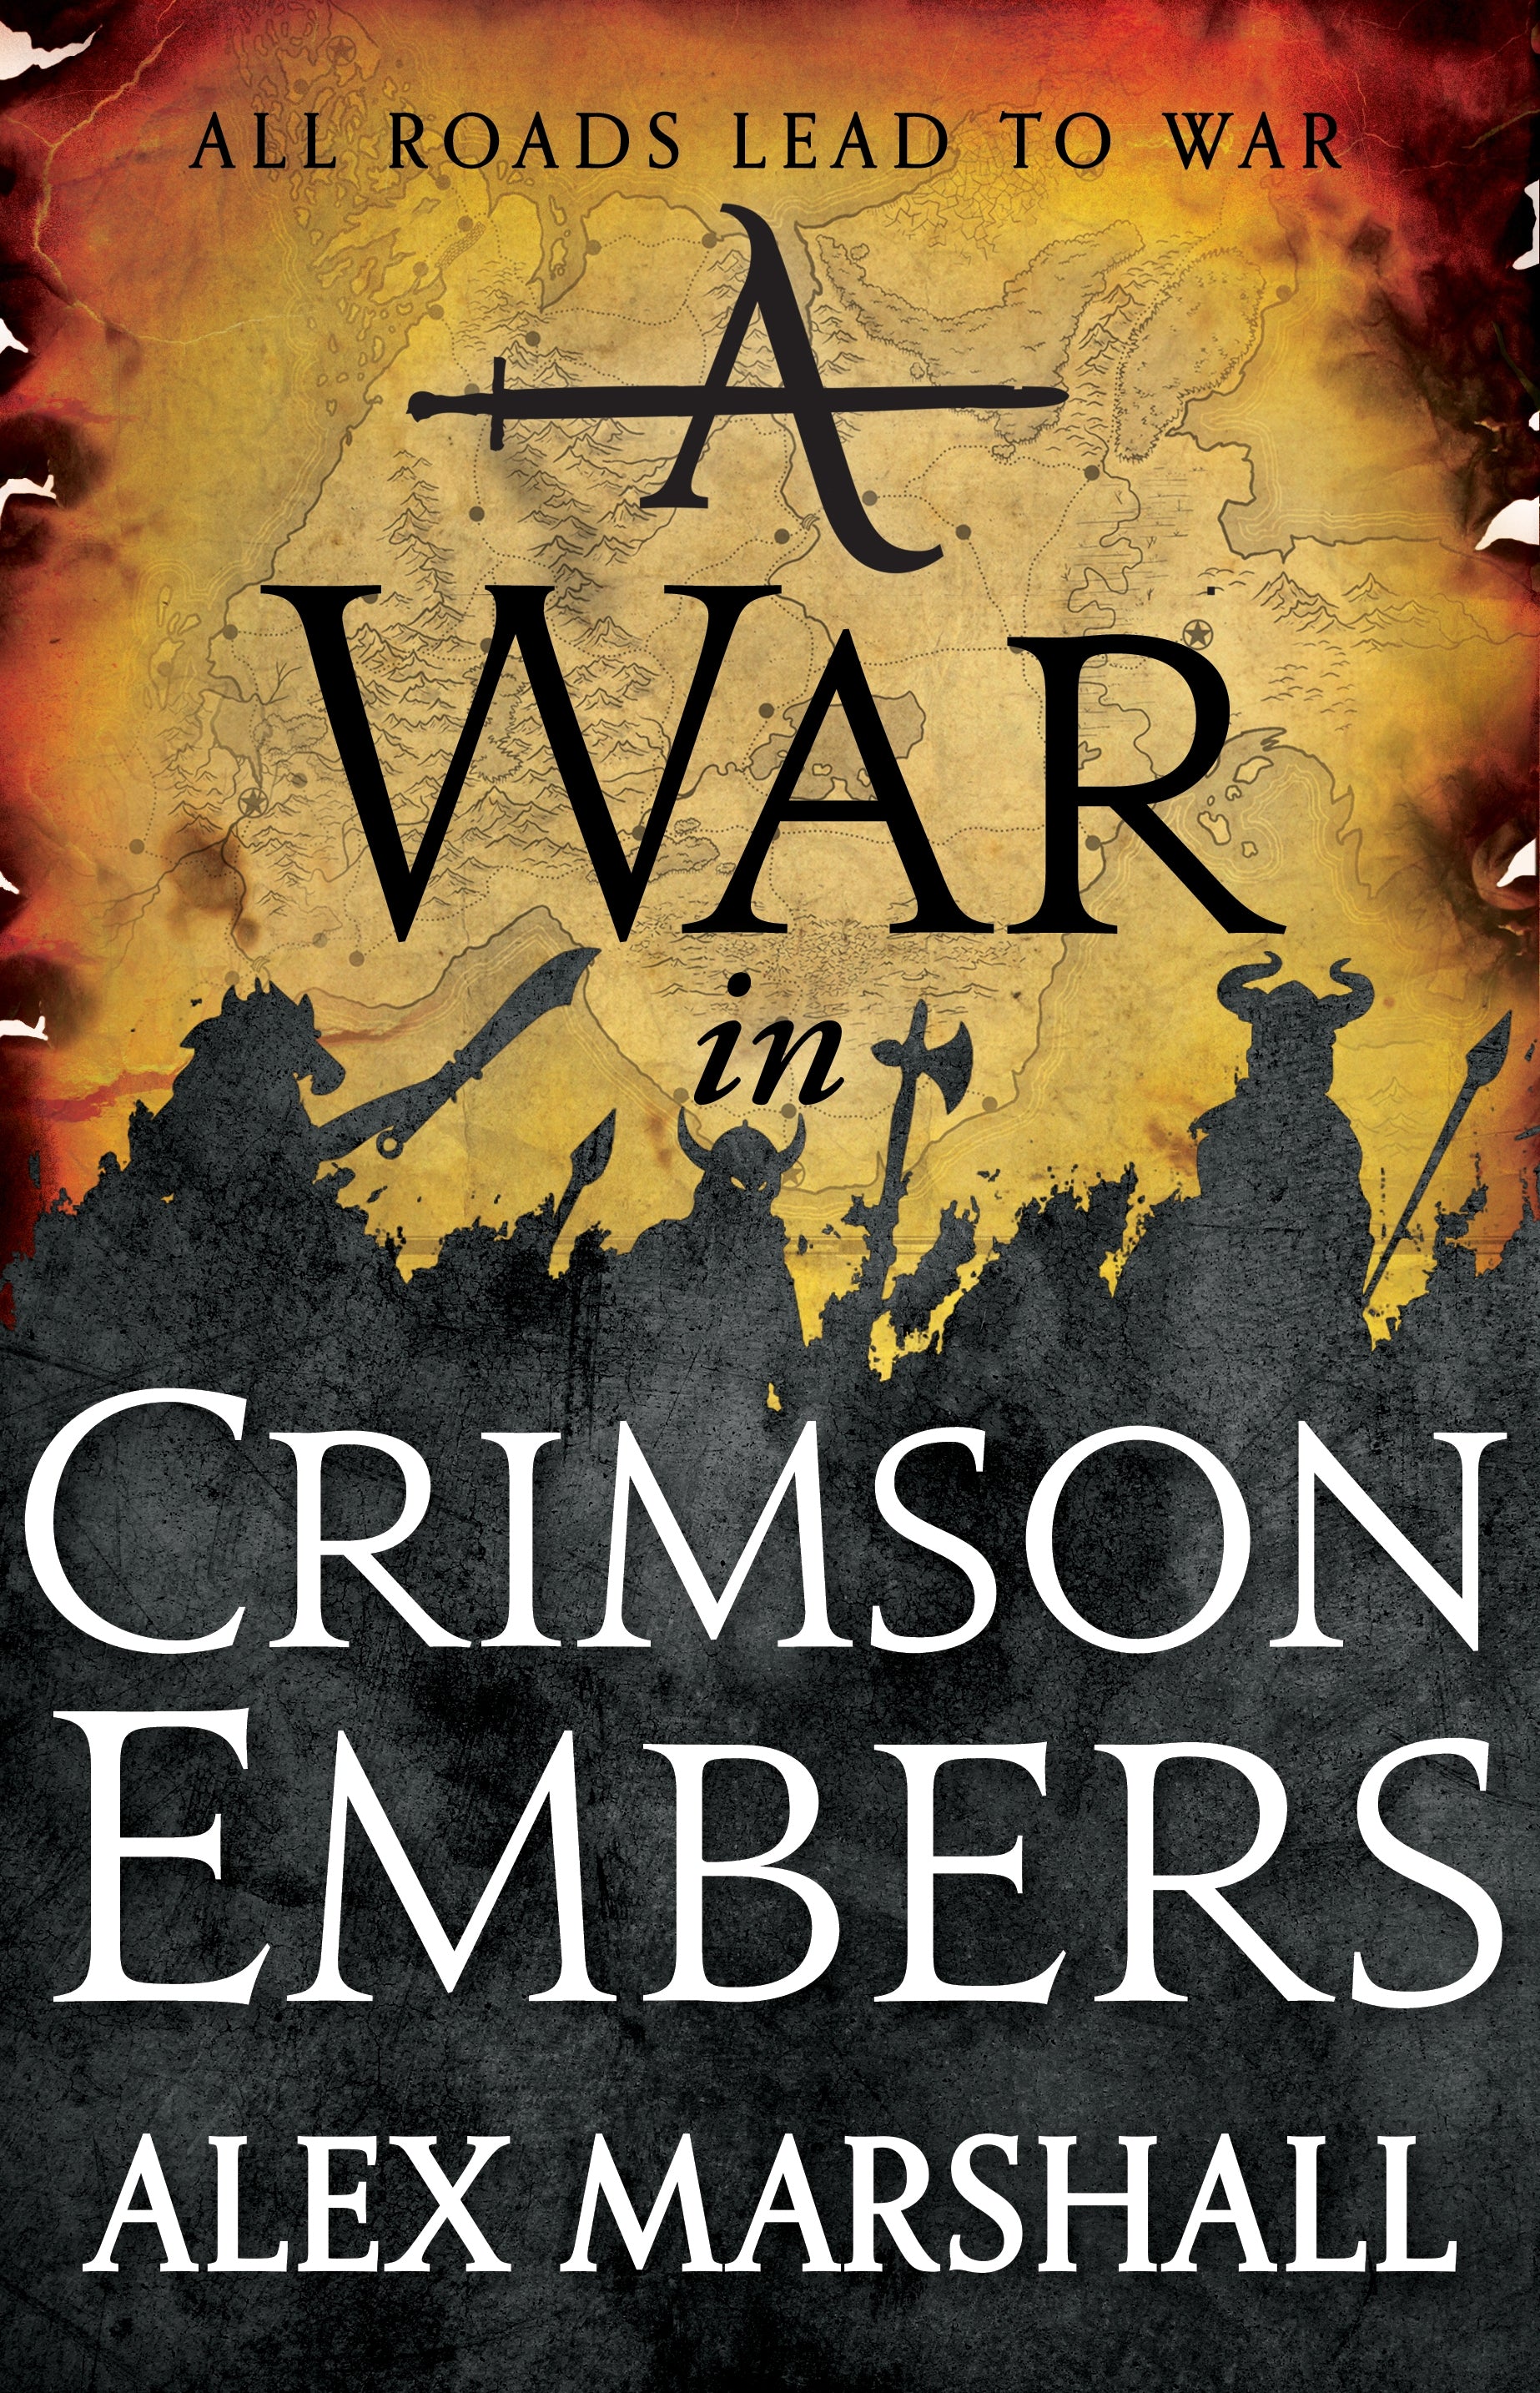 A War in Crimson Embers by Alex Marshall